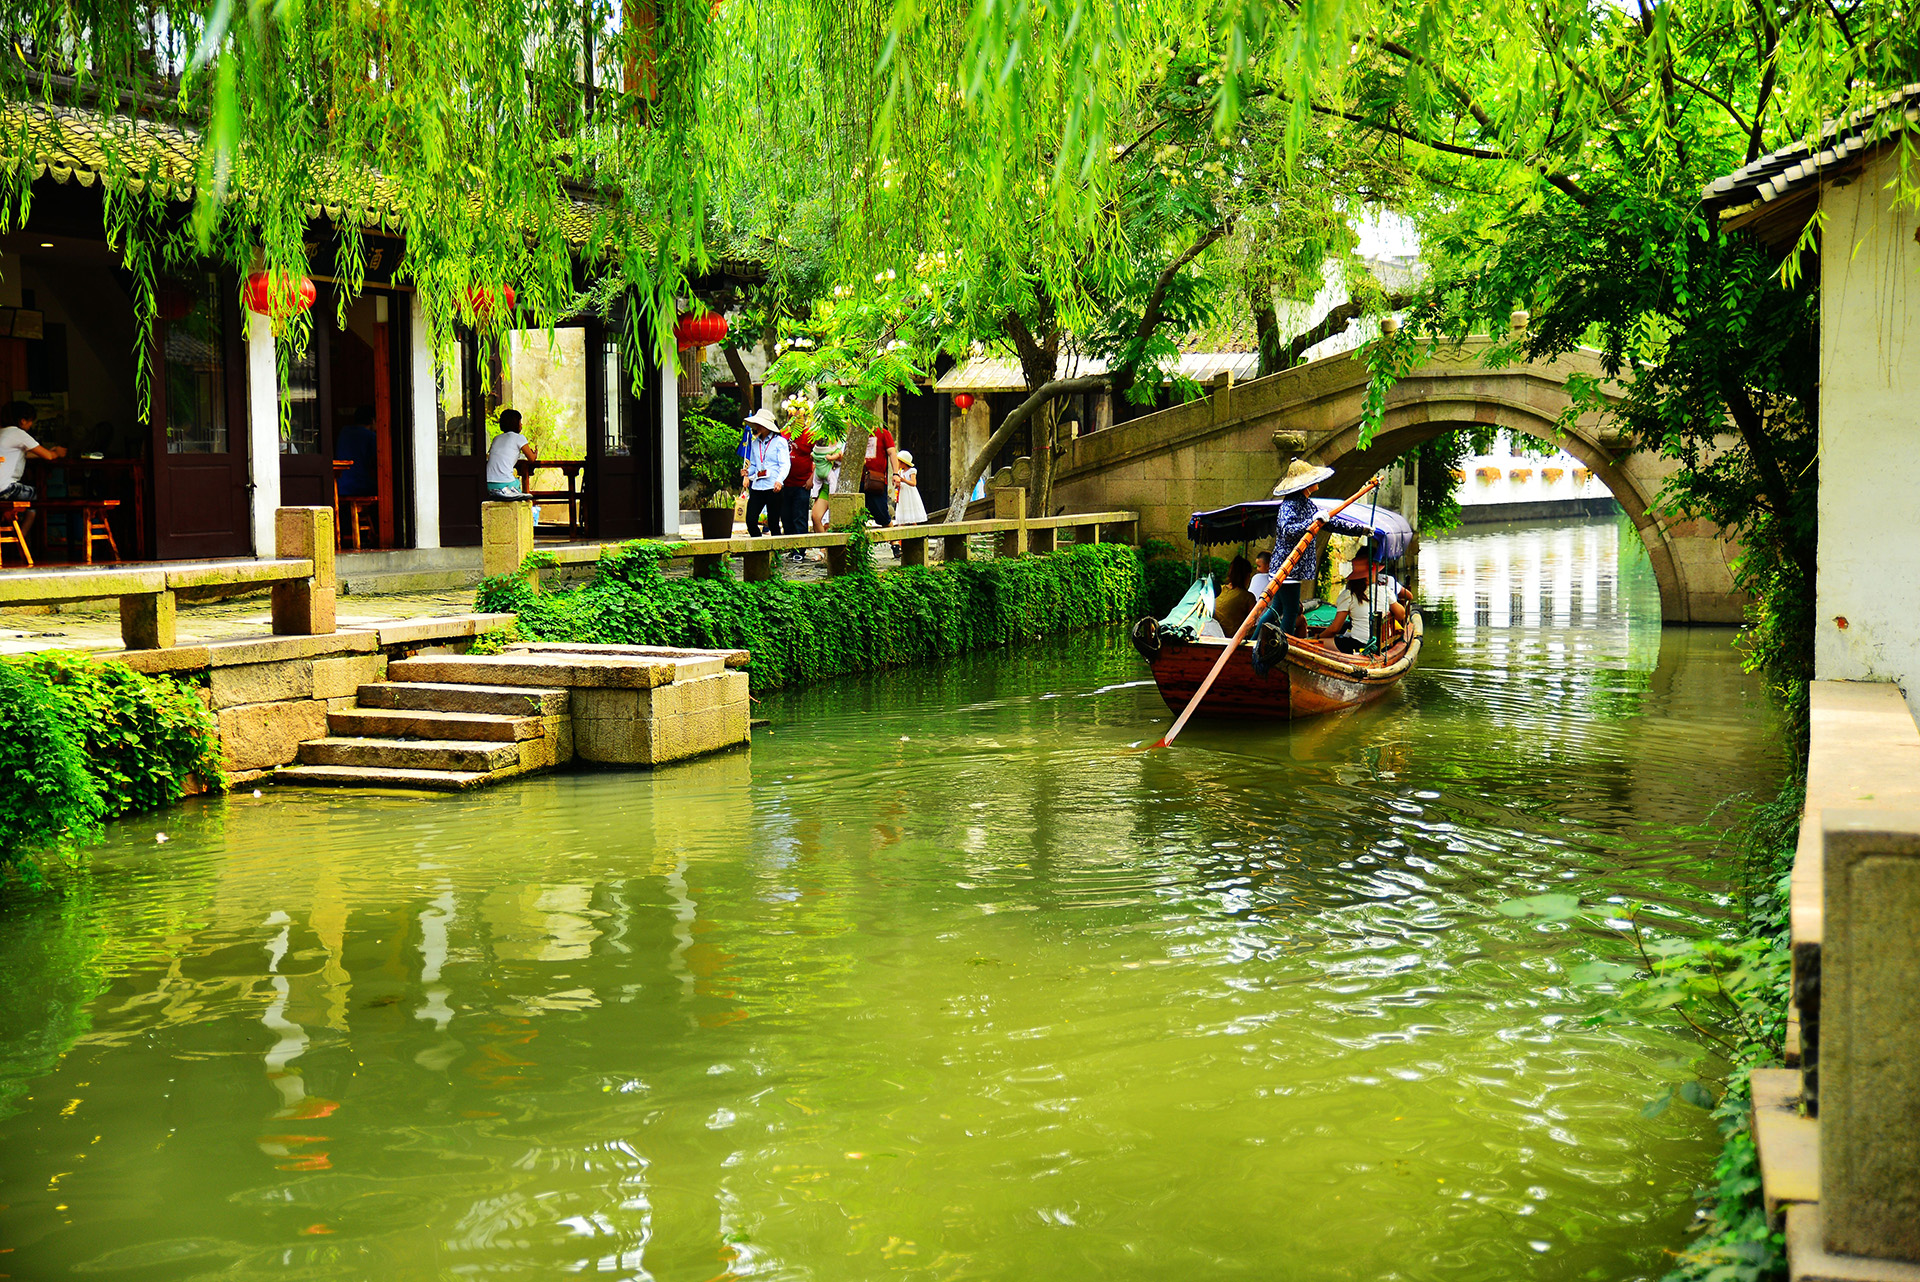 My Hometown Suzhou: A Gorgeous Water Town Rich in History and Culture